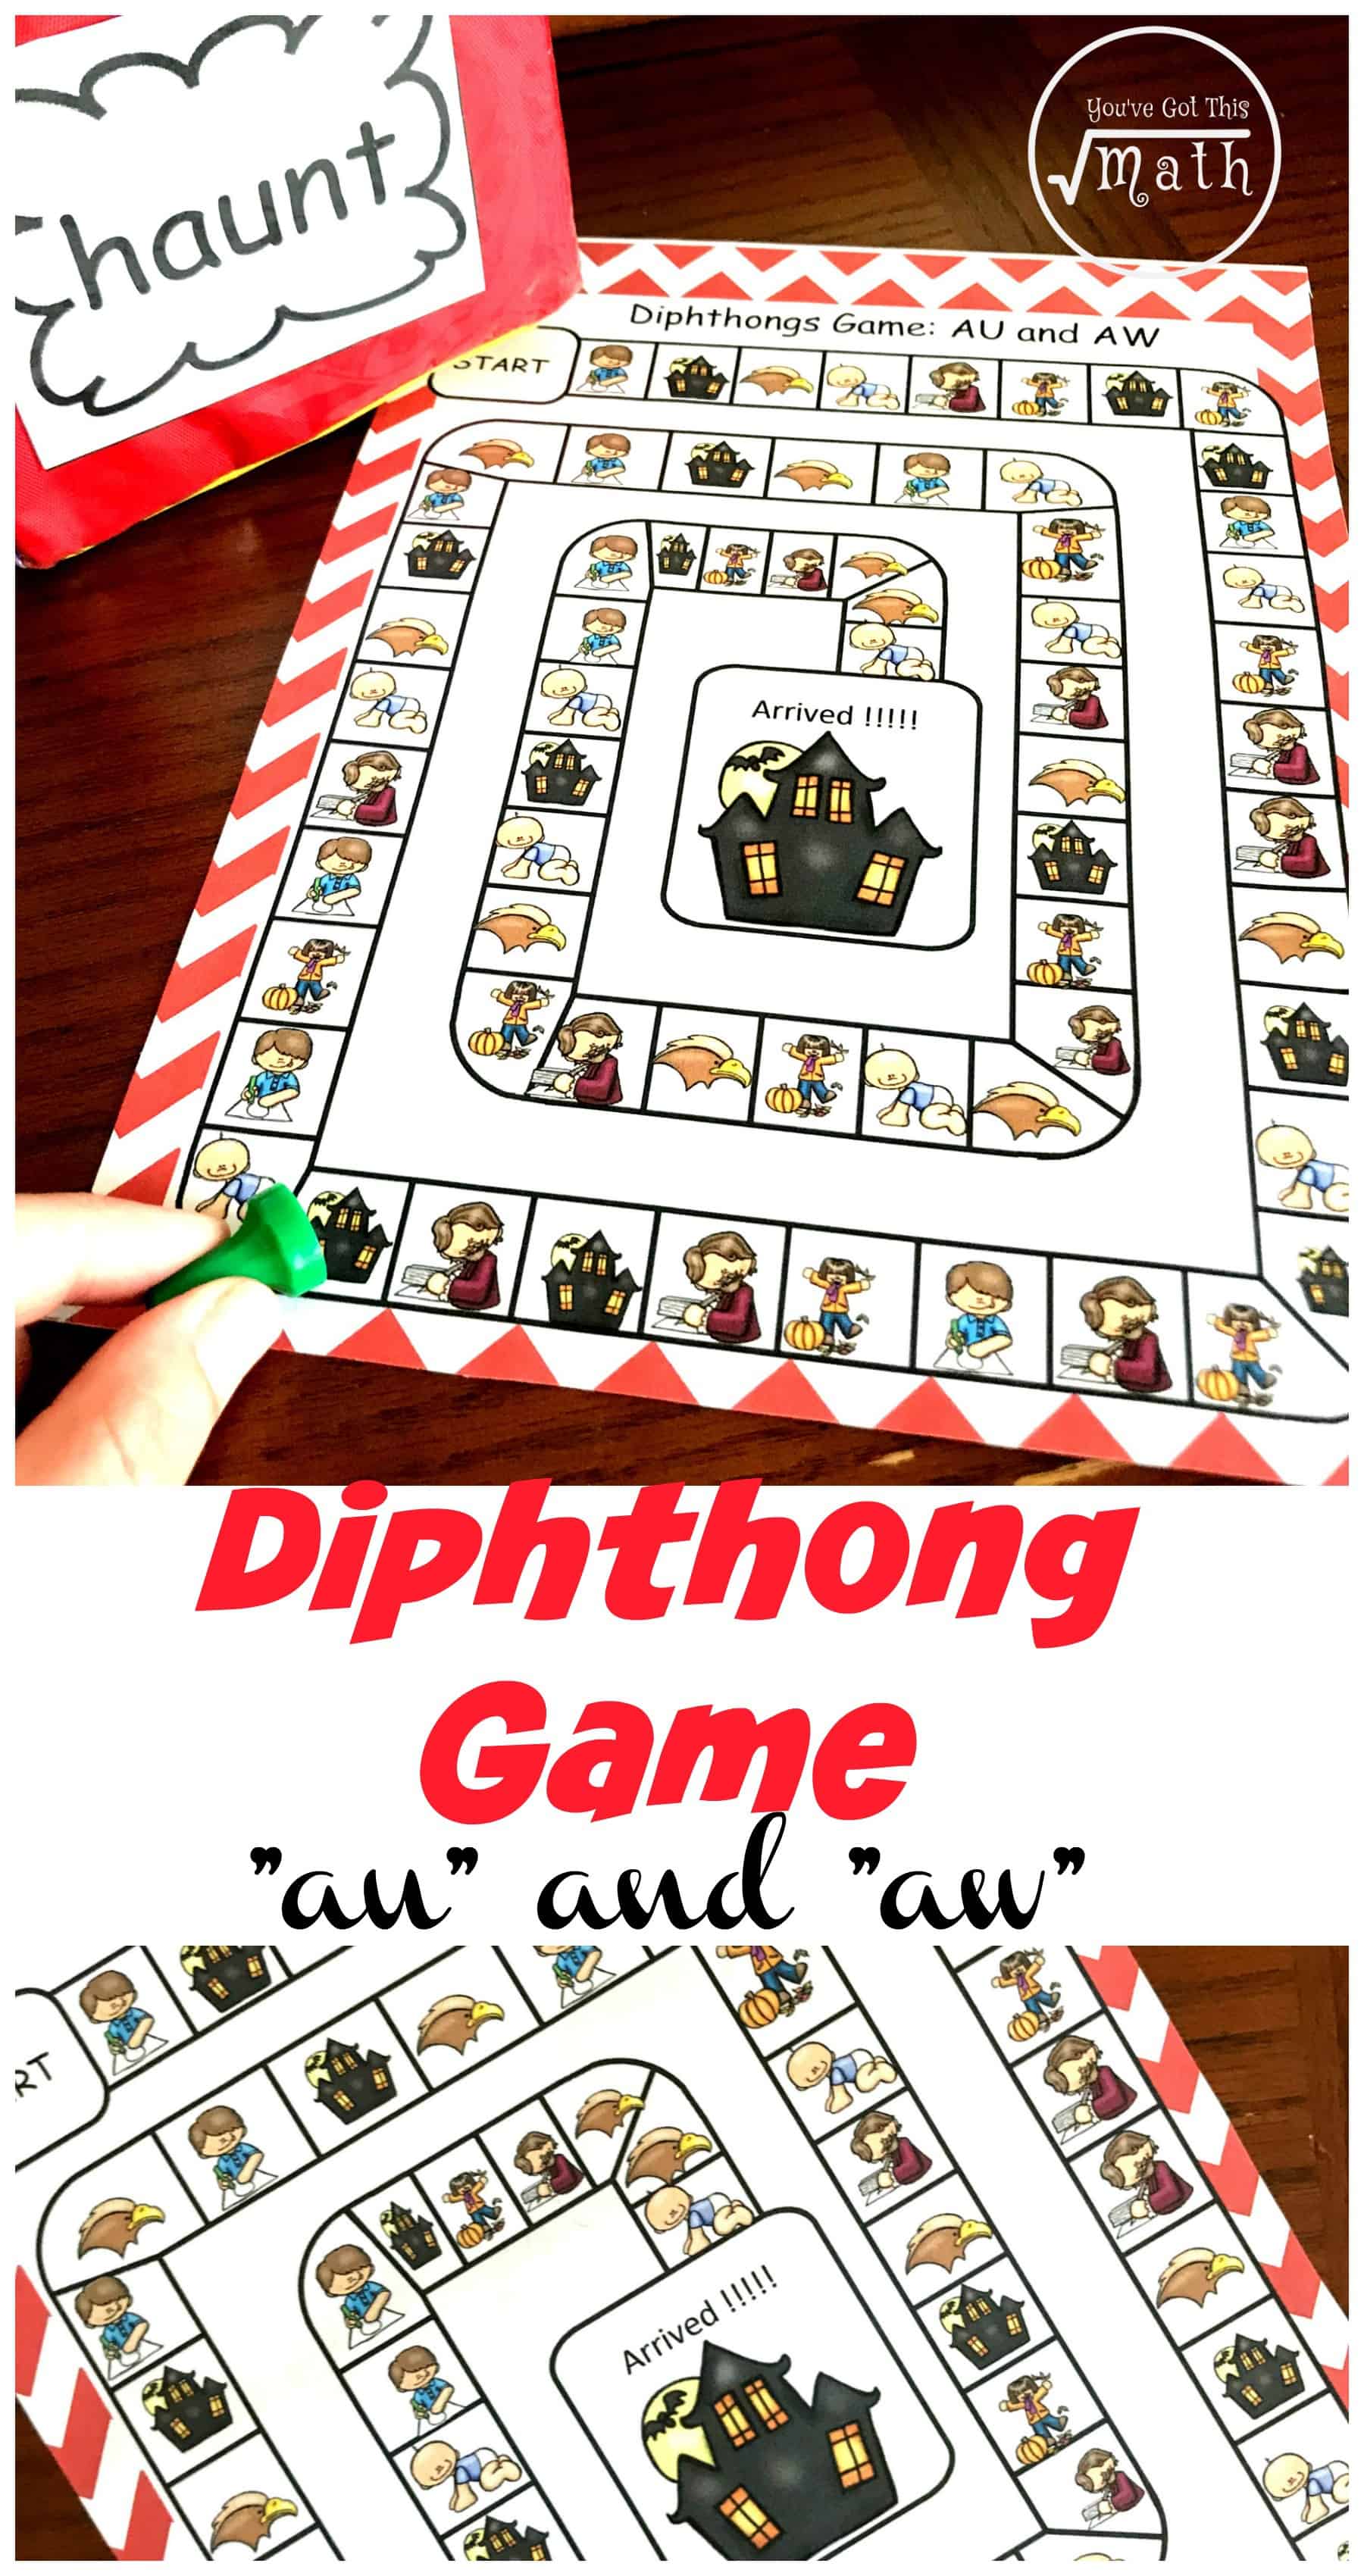 Diphthong game on a wooden background. 